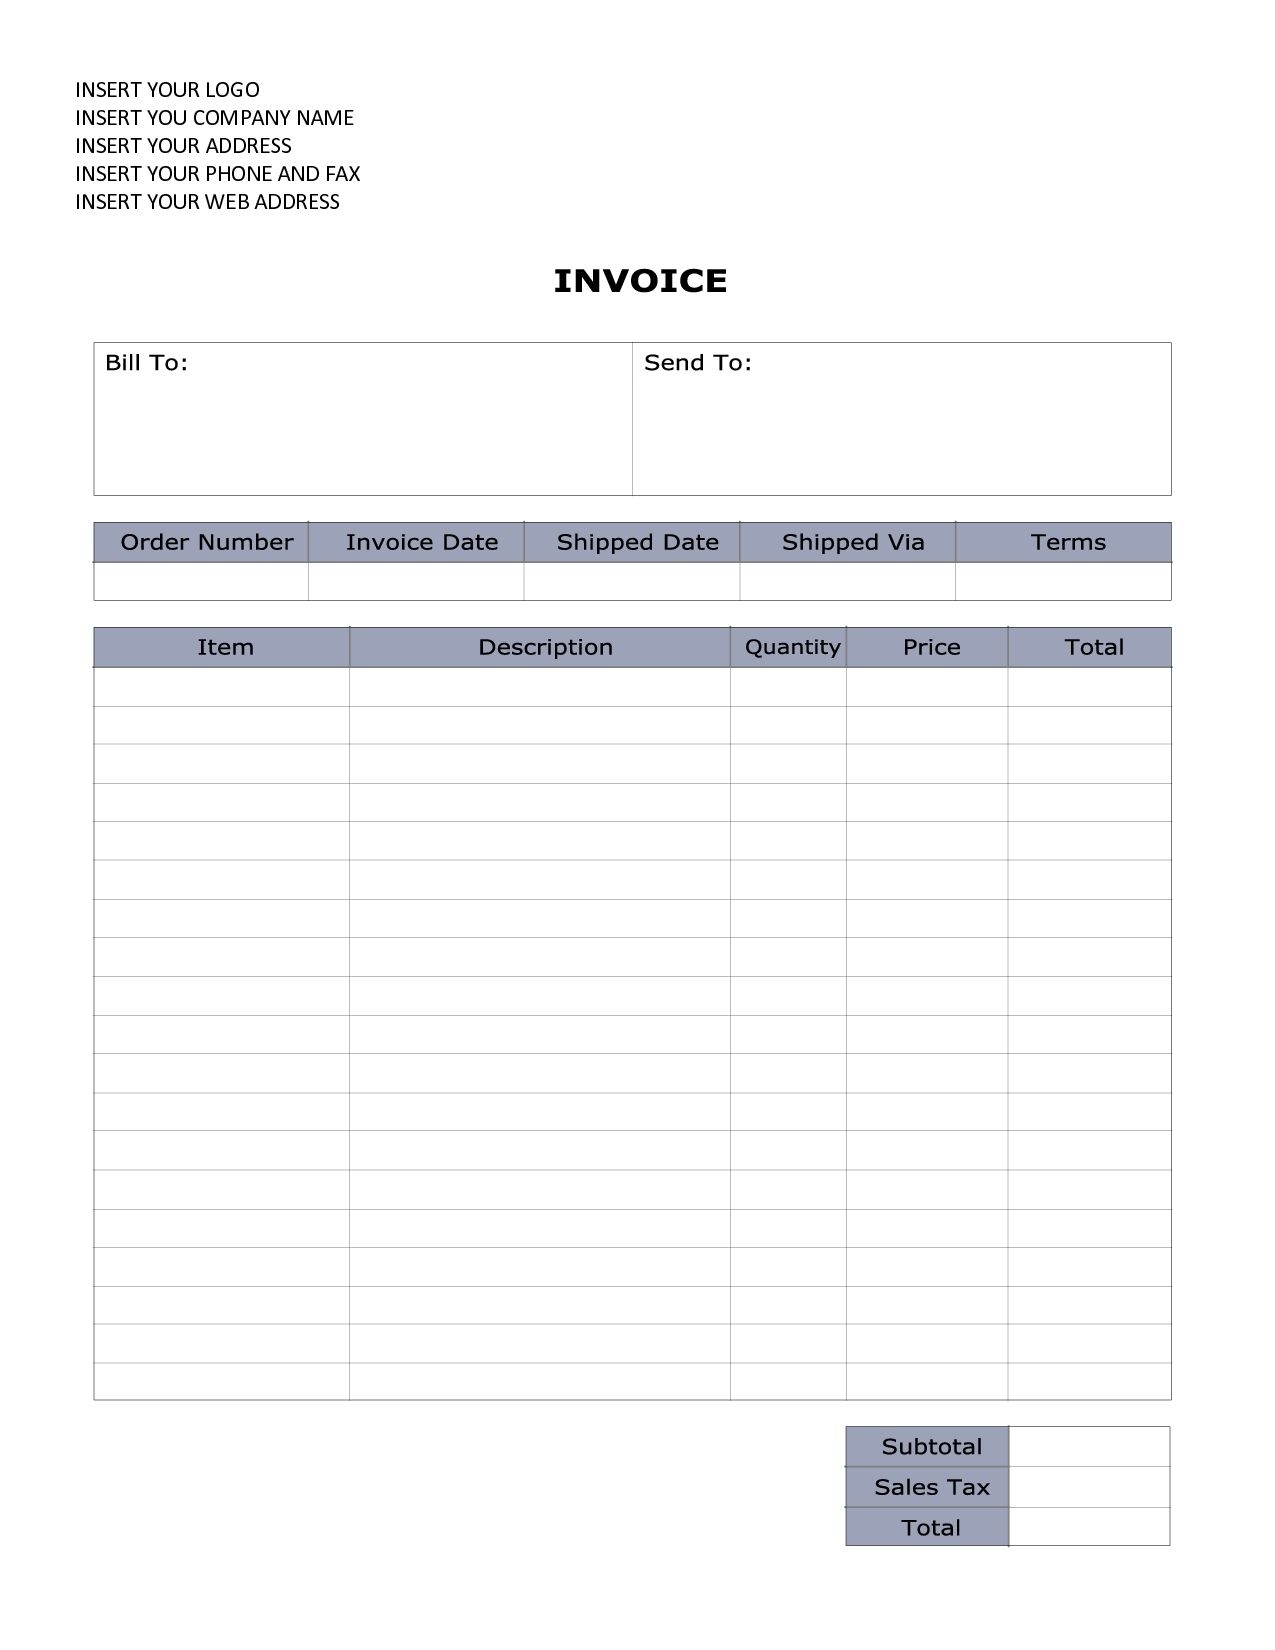 word document invoice template sales invoice sample word invoice templates printable free word